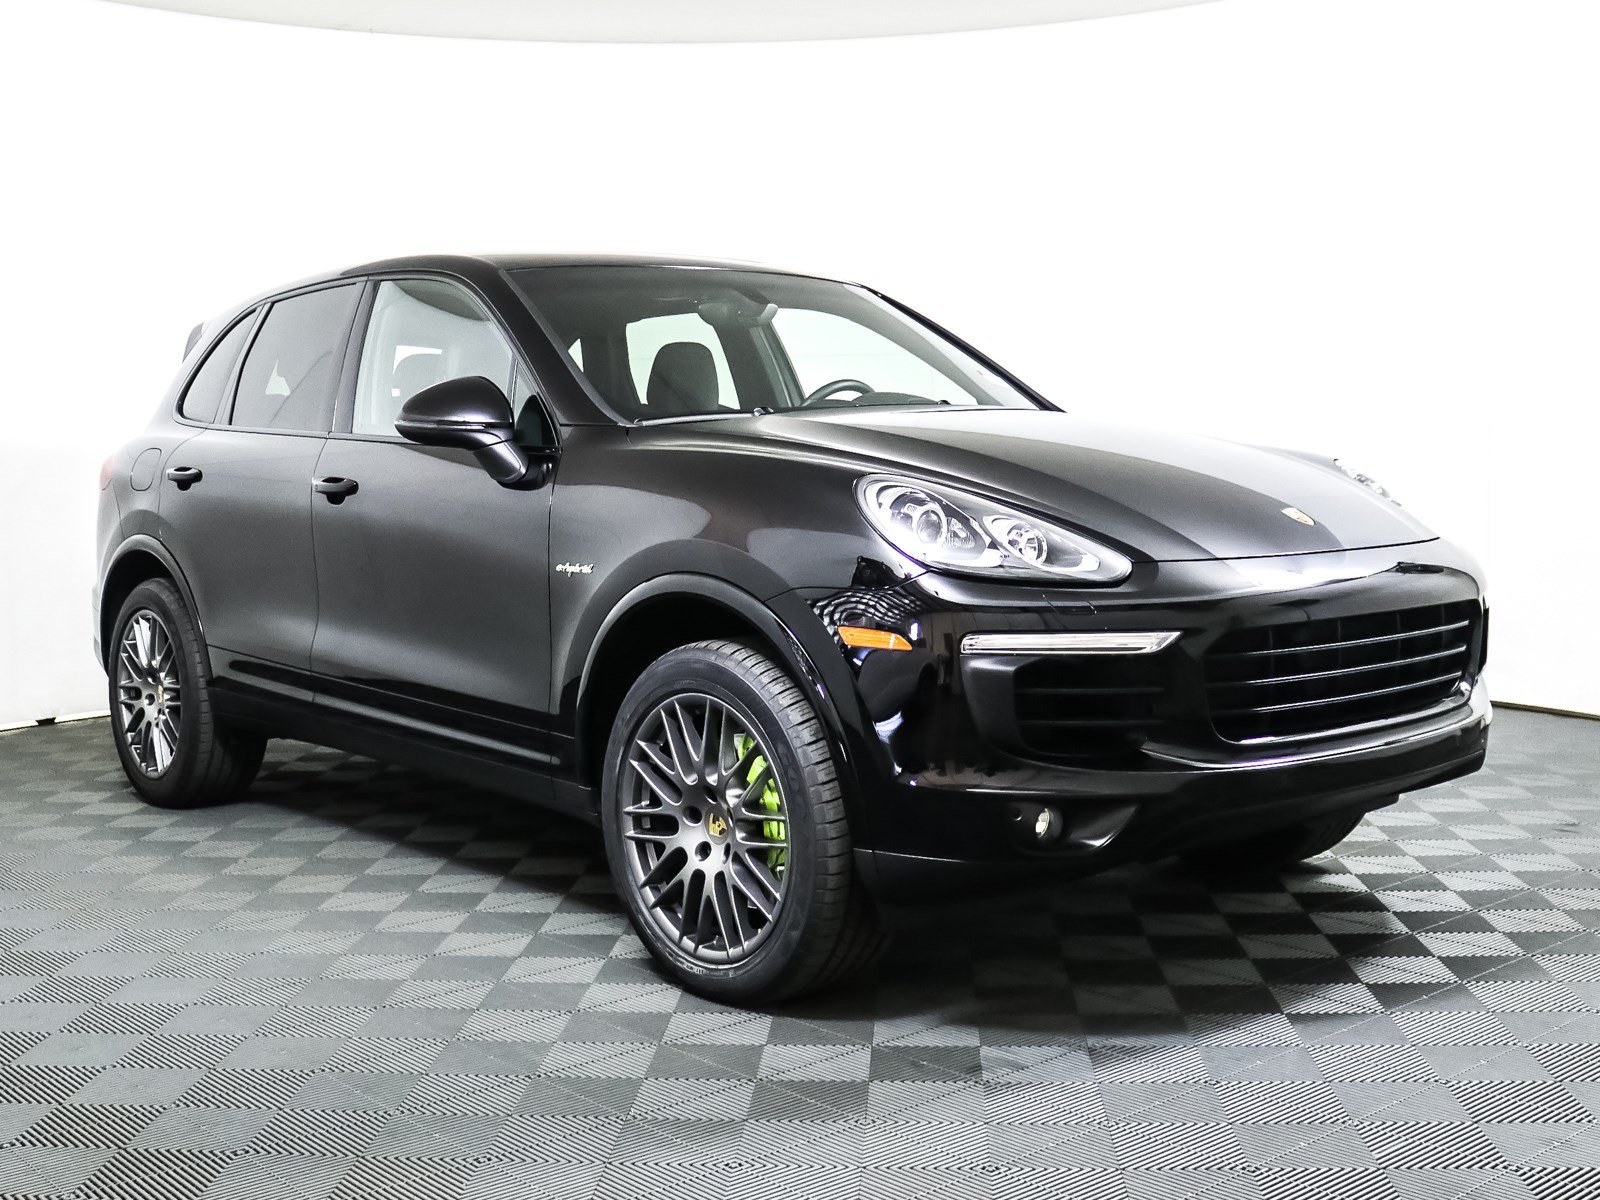 Certified Pre Owned 2017 Porsche Cayenne S E Hybrid Platinum Edition With Navigation Awd